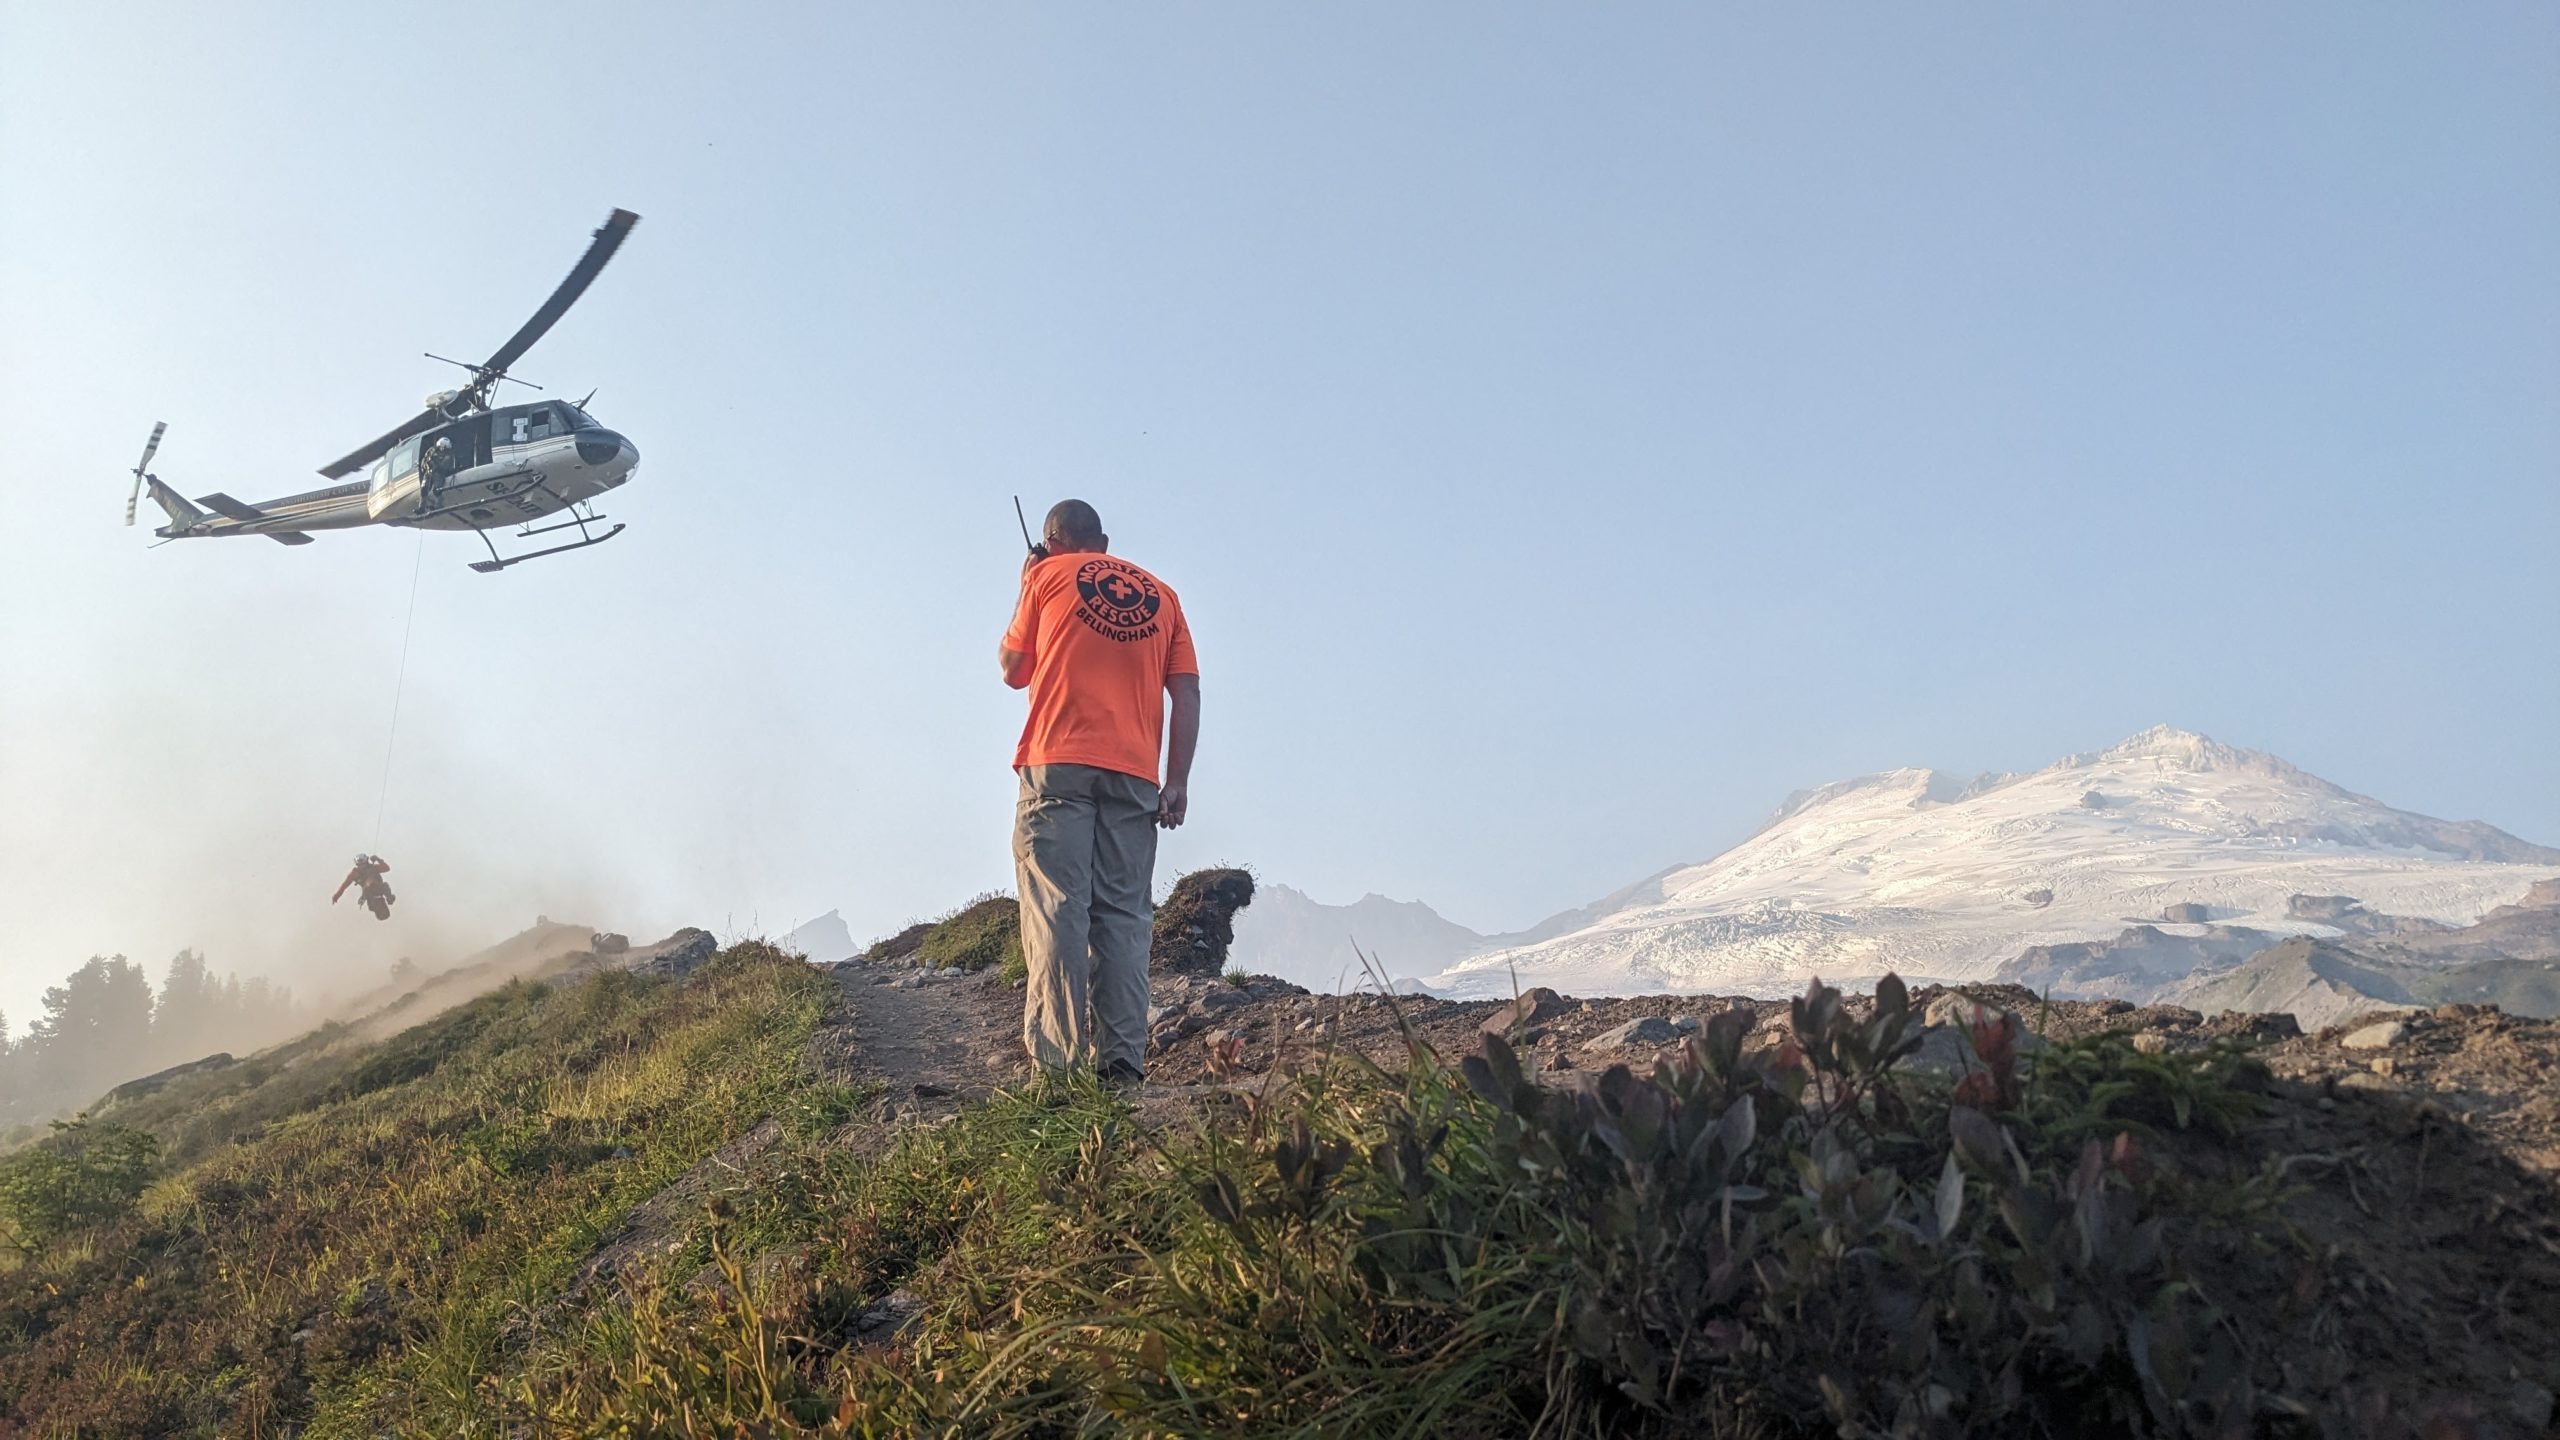 Helicopter flying in late summer with a rescuer being hoisted inside with Mount Baker in the background and another rescuer communicating in the foreground via radio.